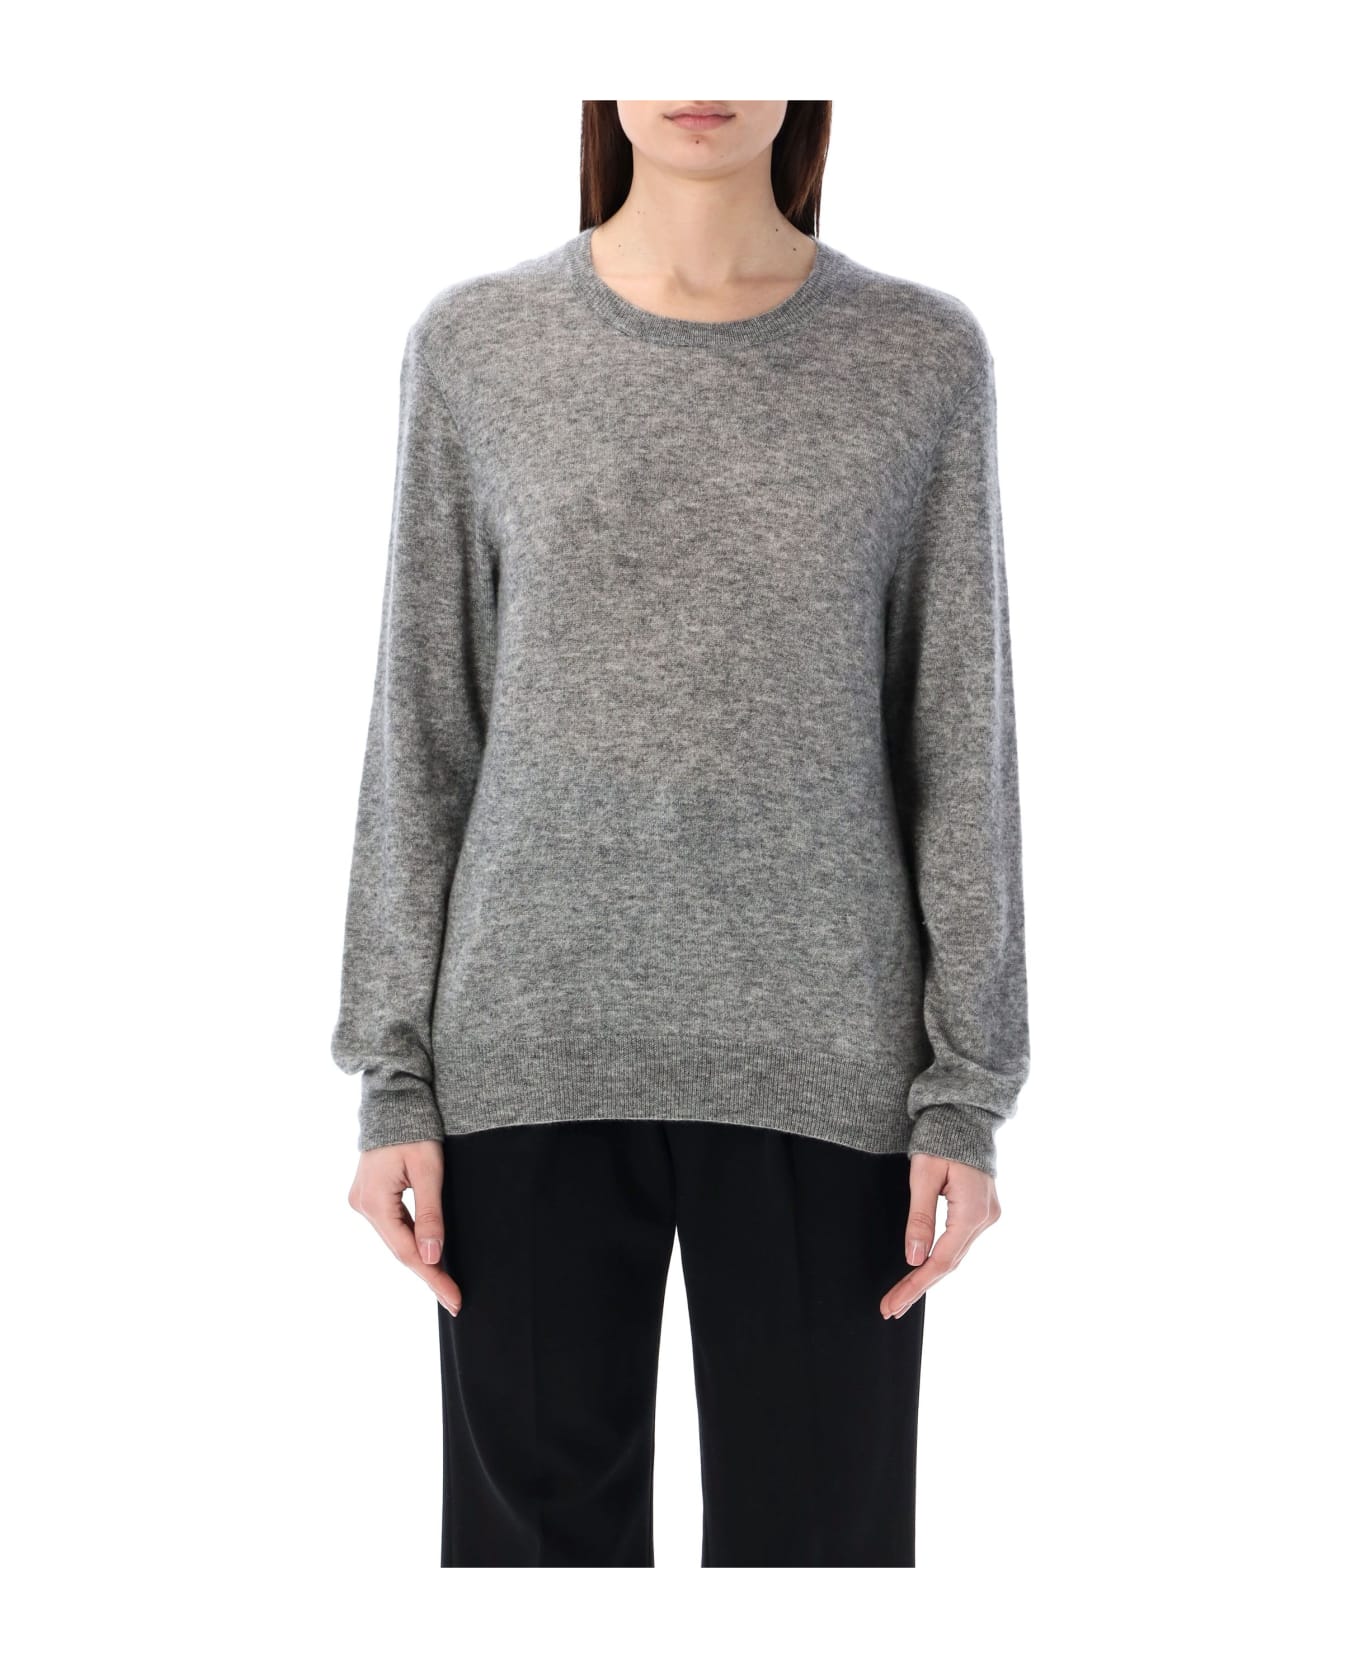 Saint Laurent Cashmere And Silk Sweater - GREY